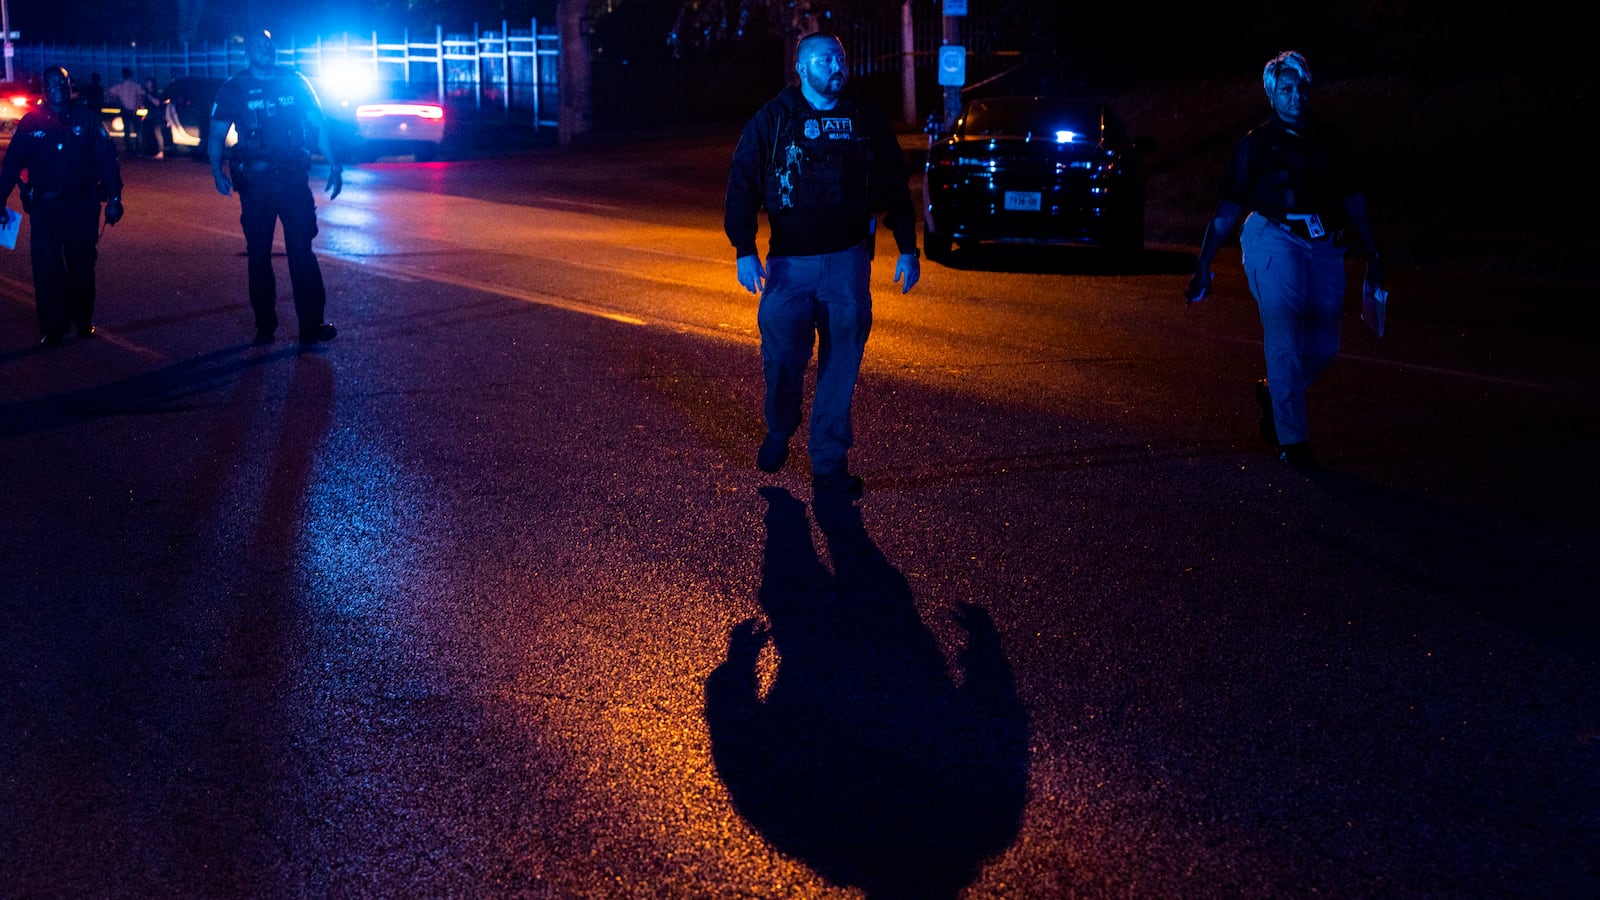 Police investigate a crime scene at night with police lights glowing